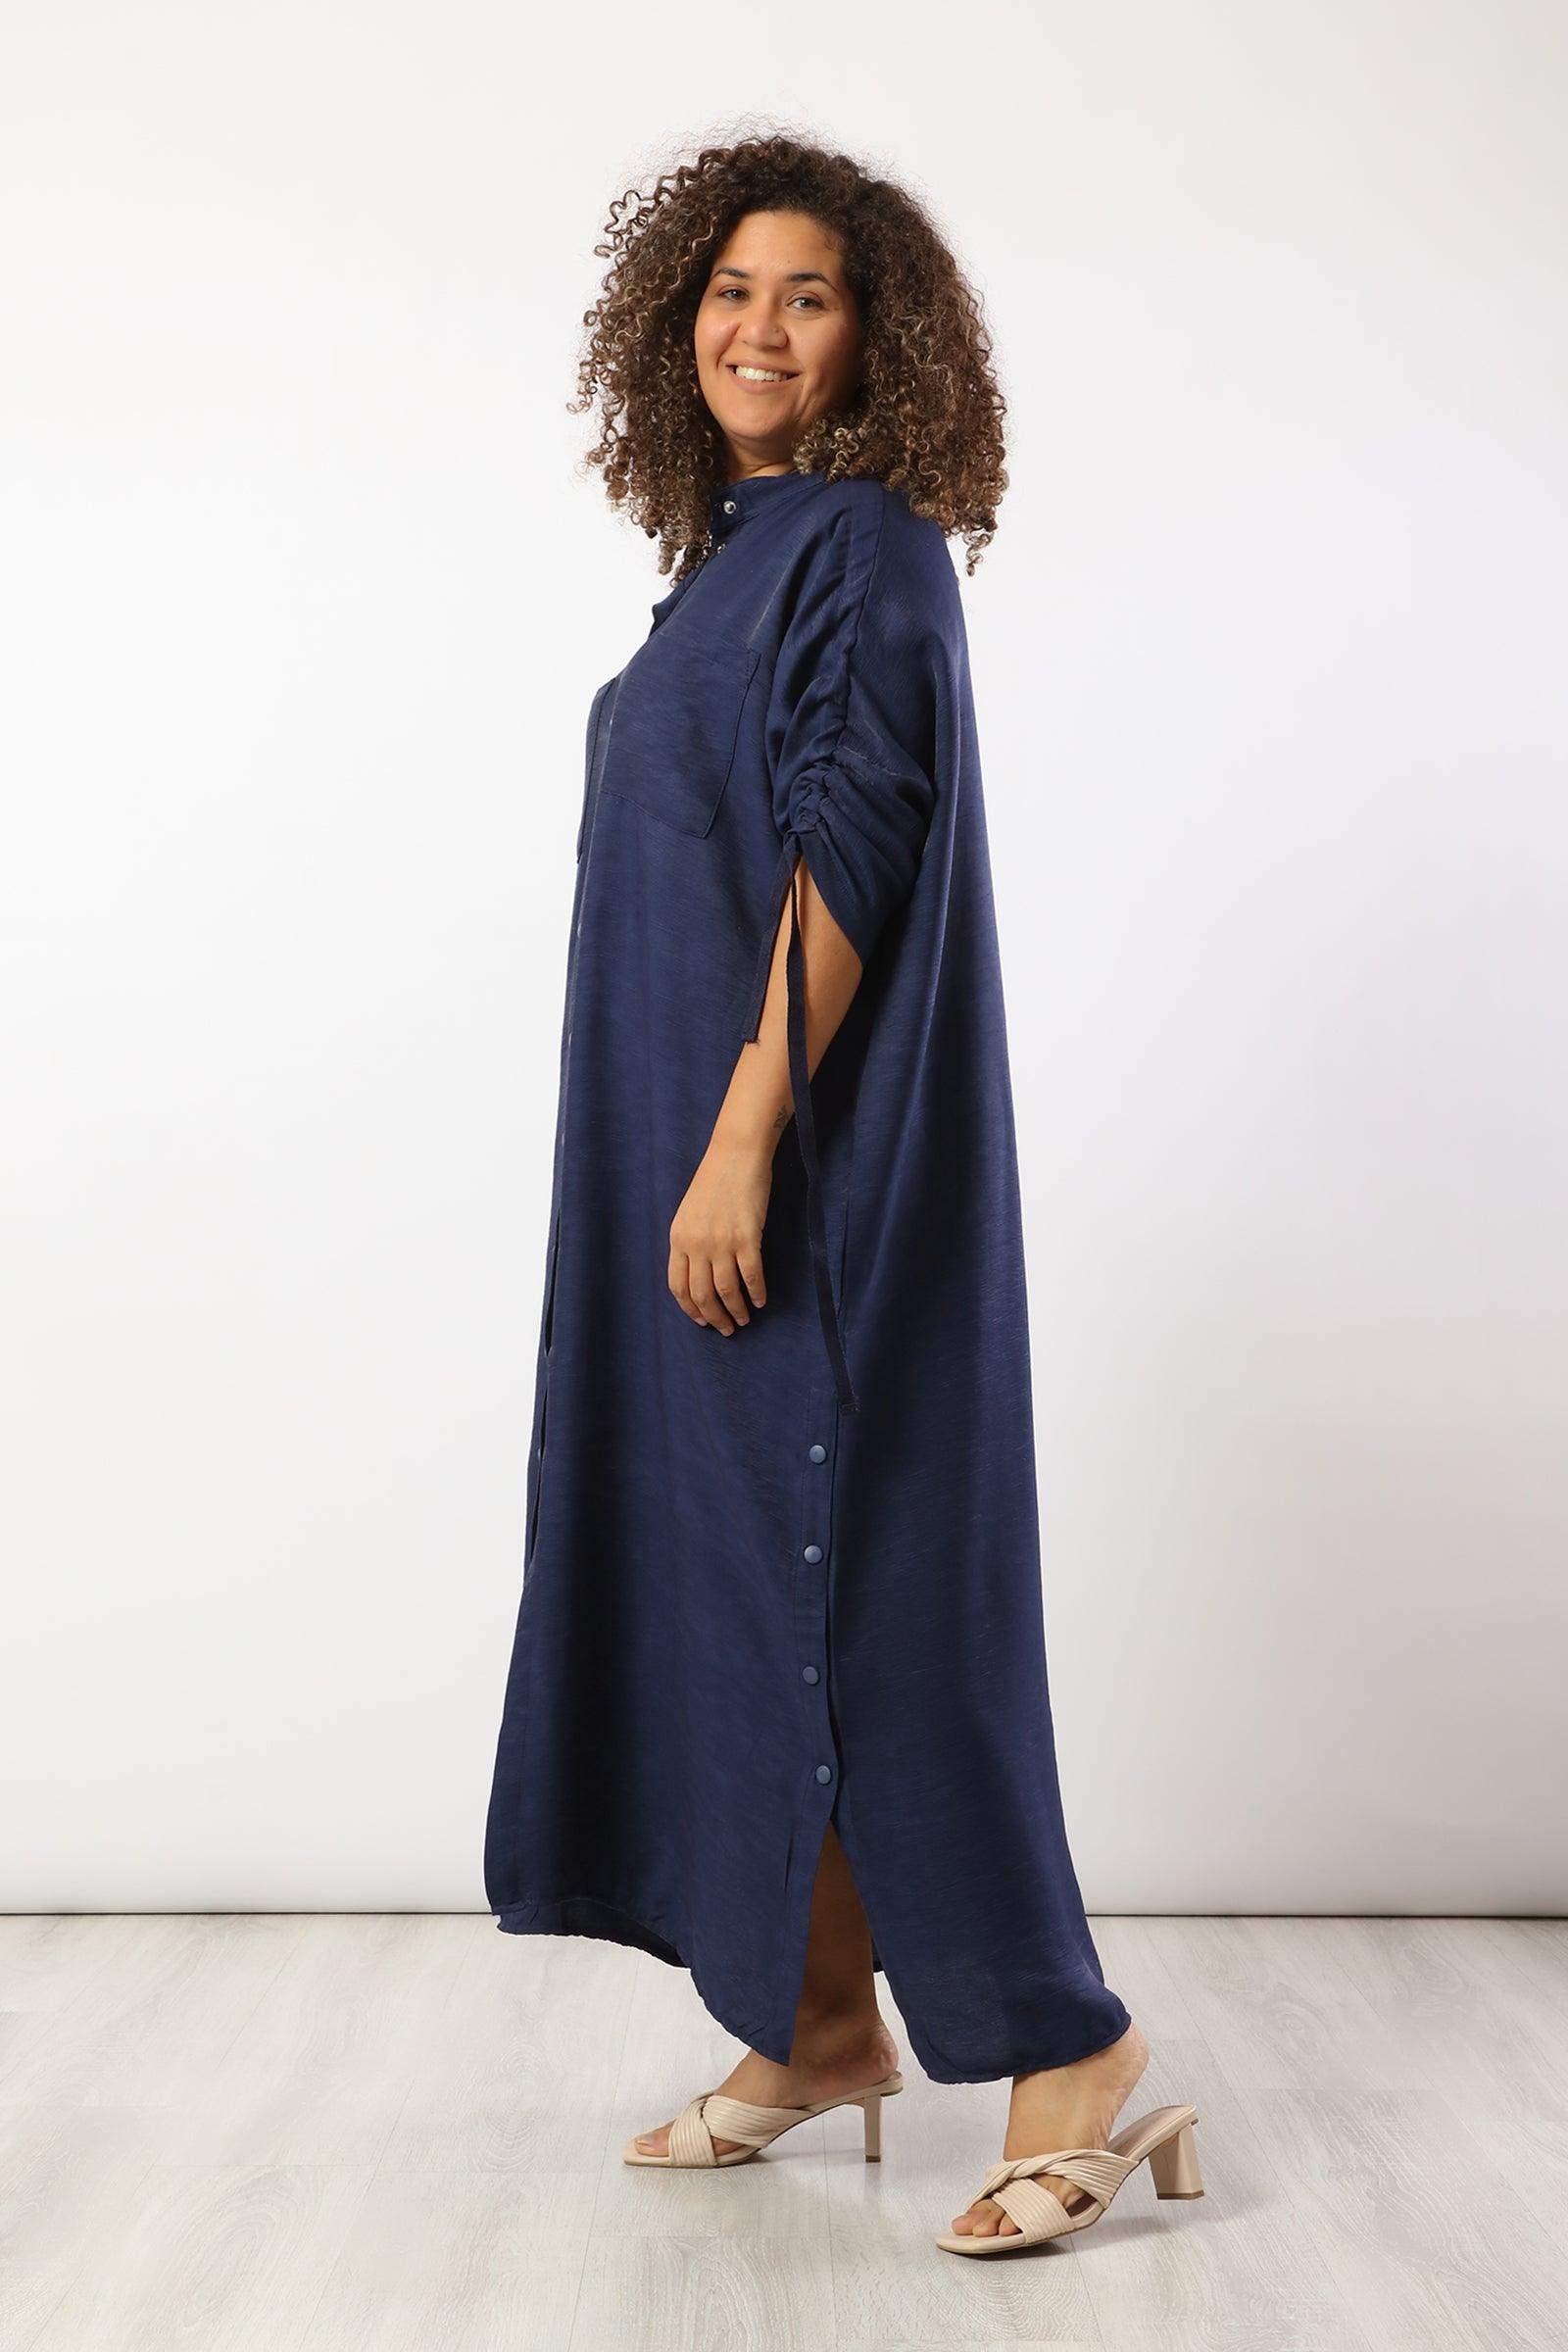 Dress with Adjustable Sleeves - Carina - كارينا